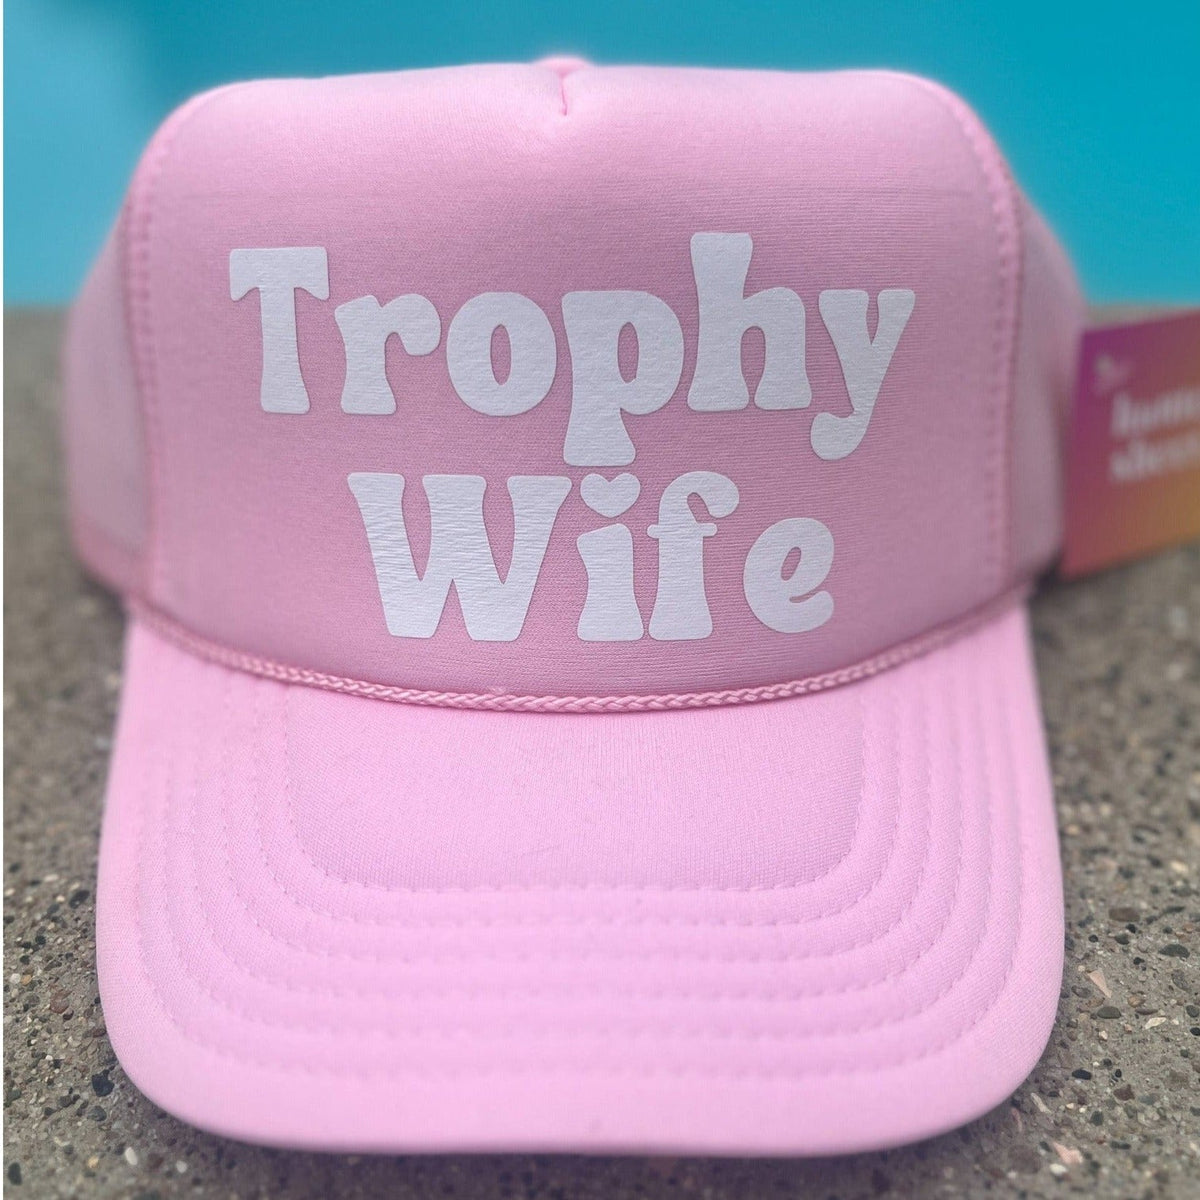 Trophy Wife White and Pink Trucker Hat Hats TheFringeCultureCollective